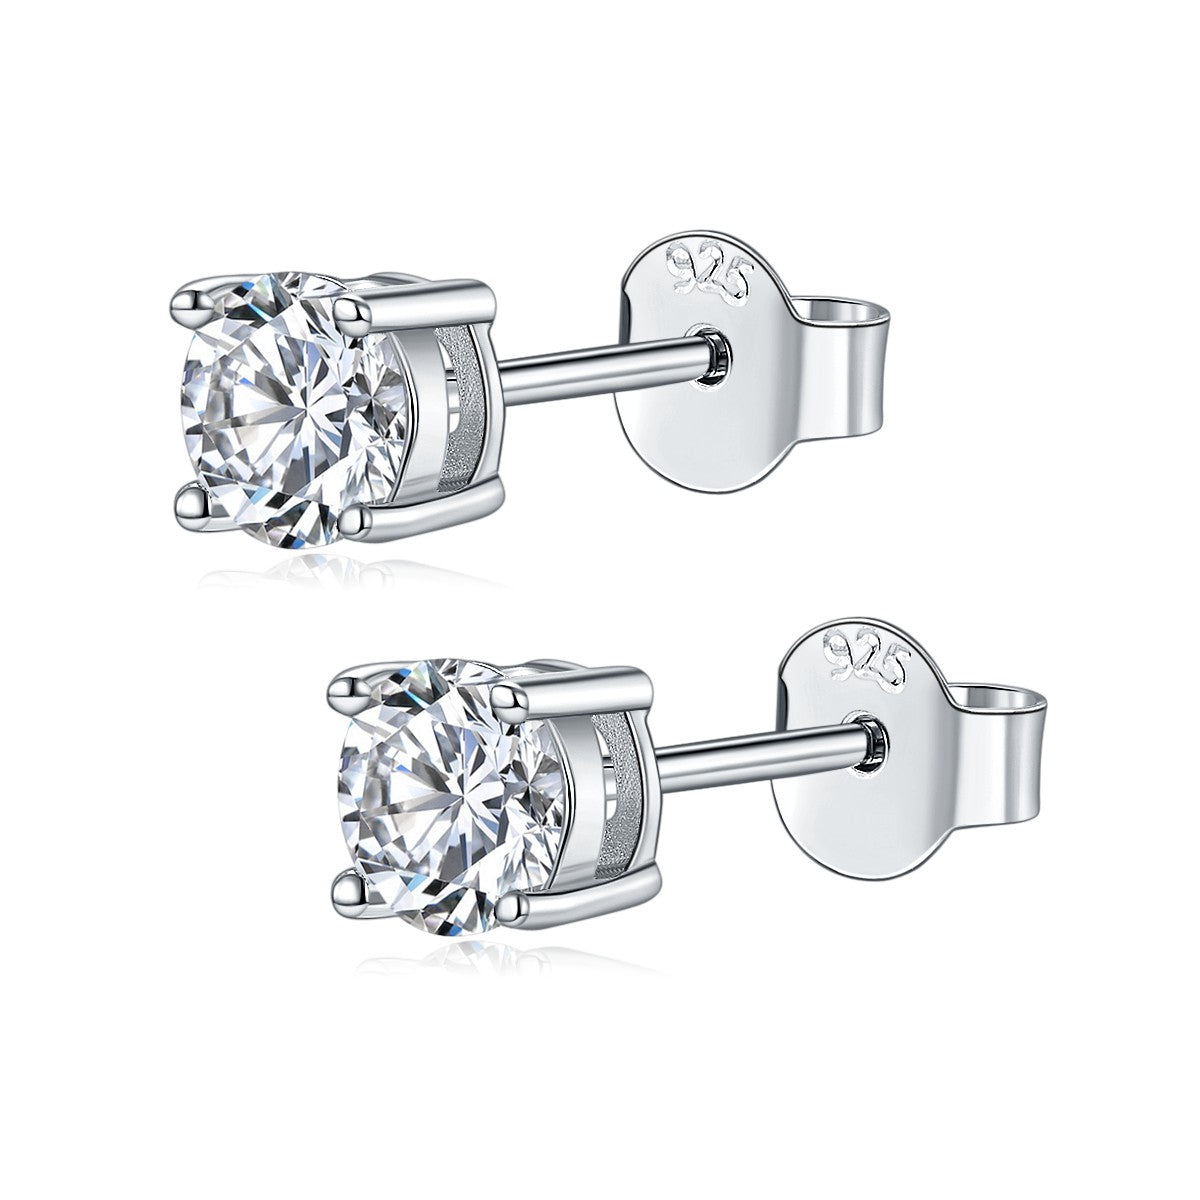 【02LIVE # link 34 - BUY 1 GET 1 free ring】S925 Silver Moissanite Diamond Four claw ear stud Earrings EM4020